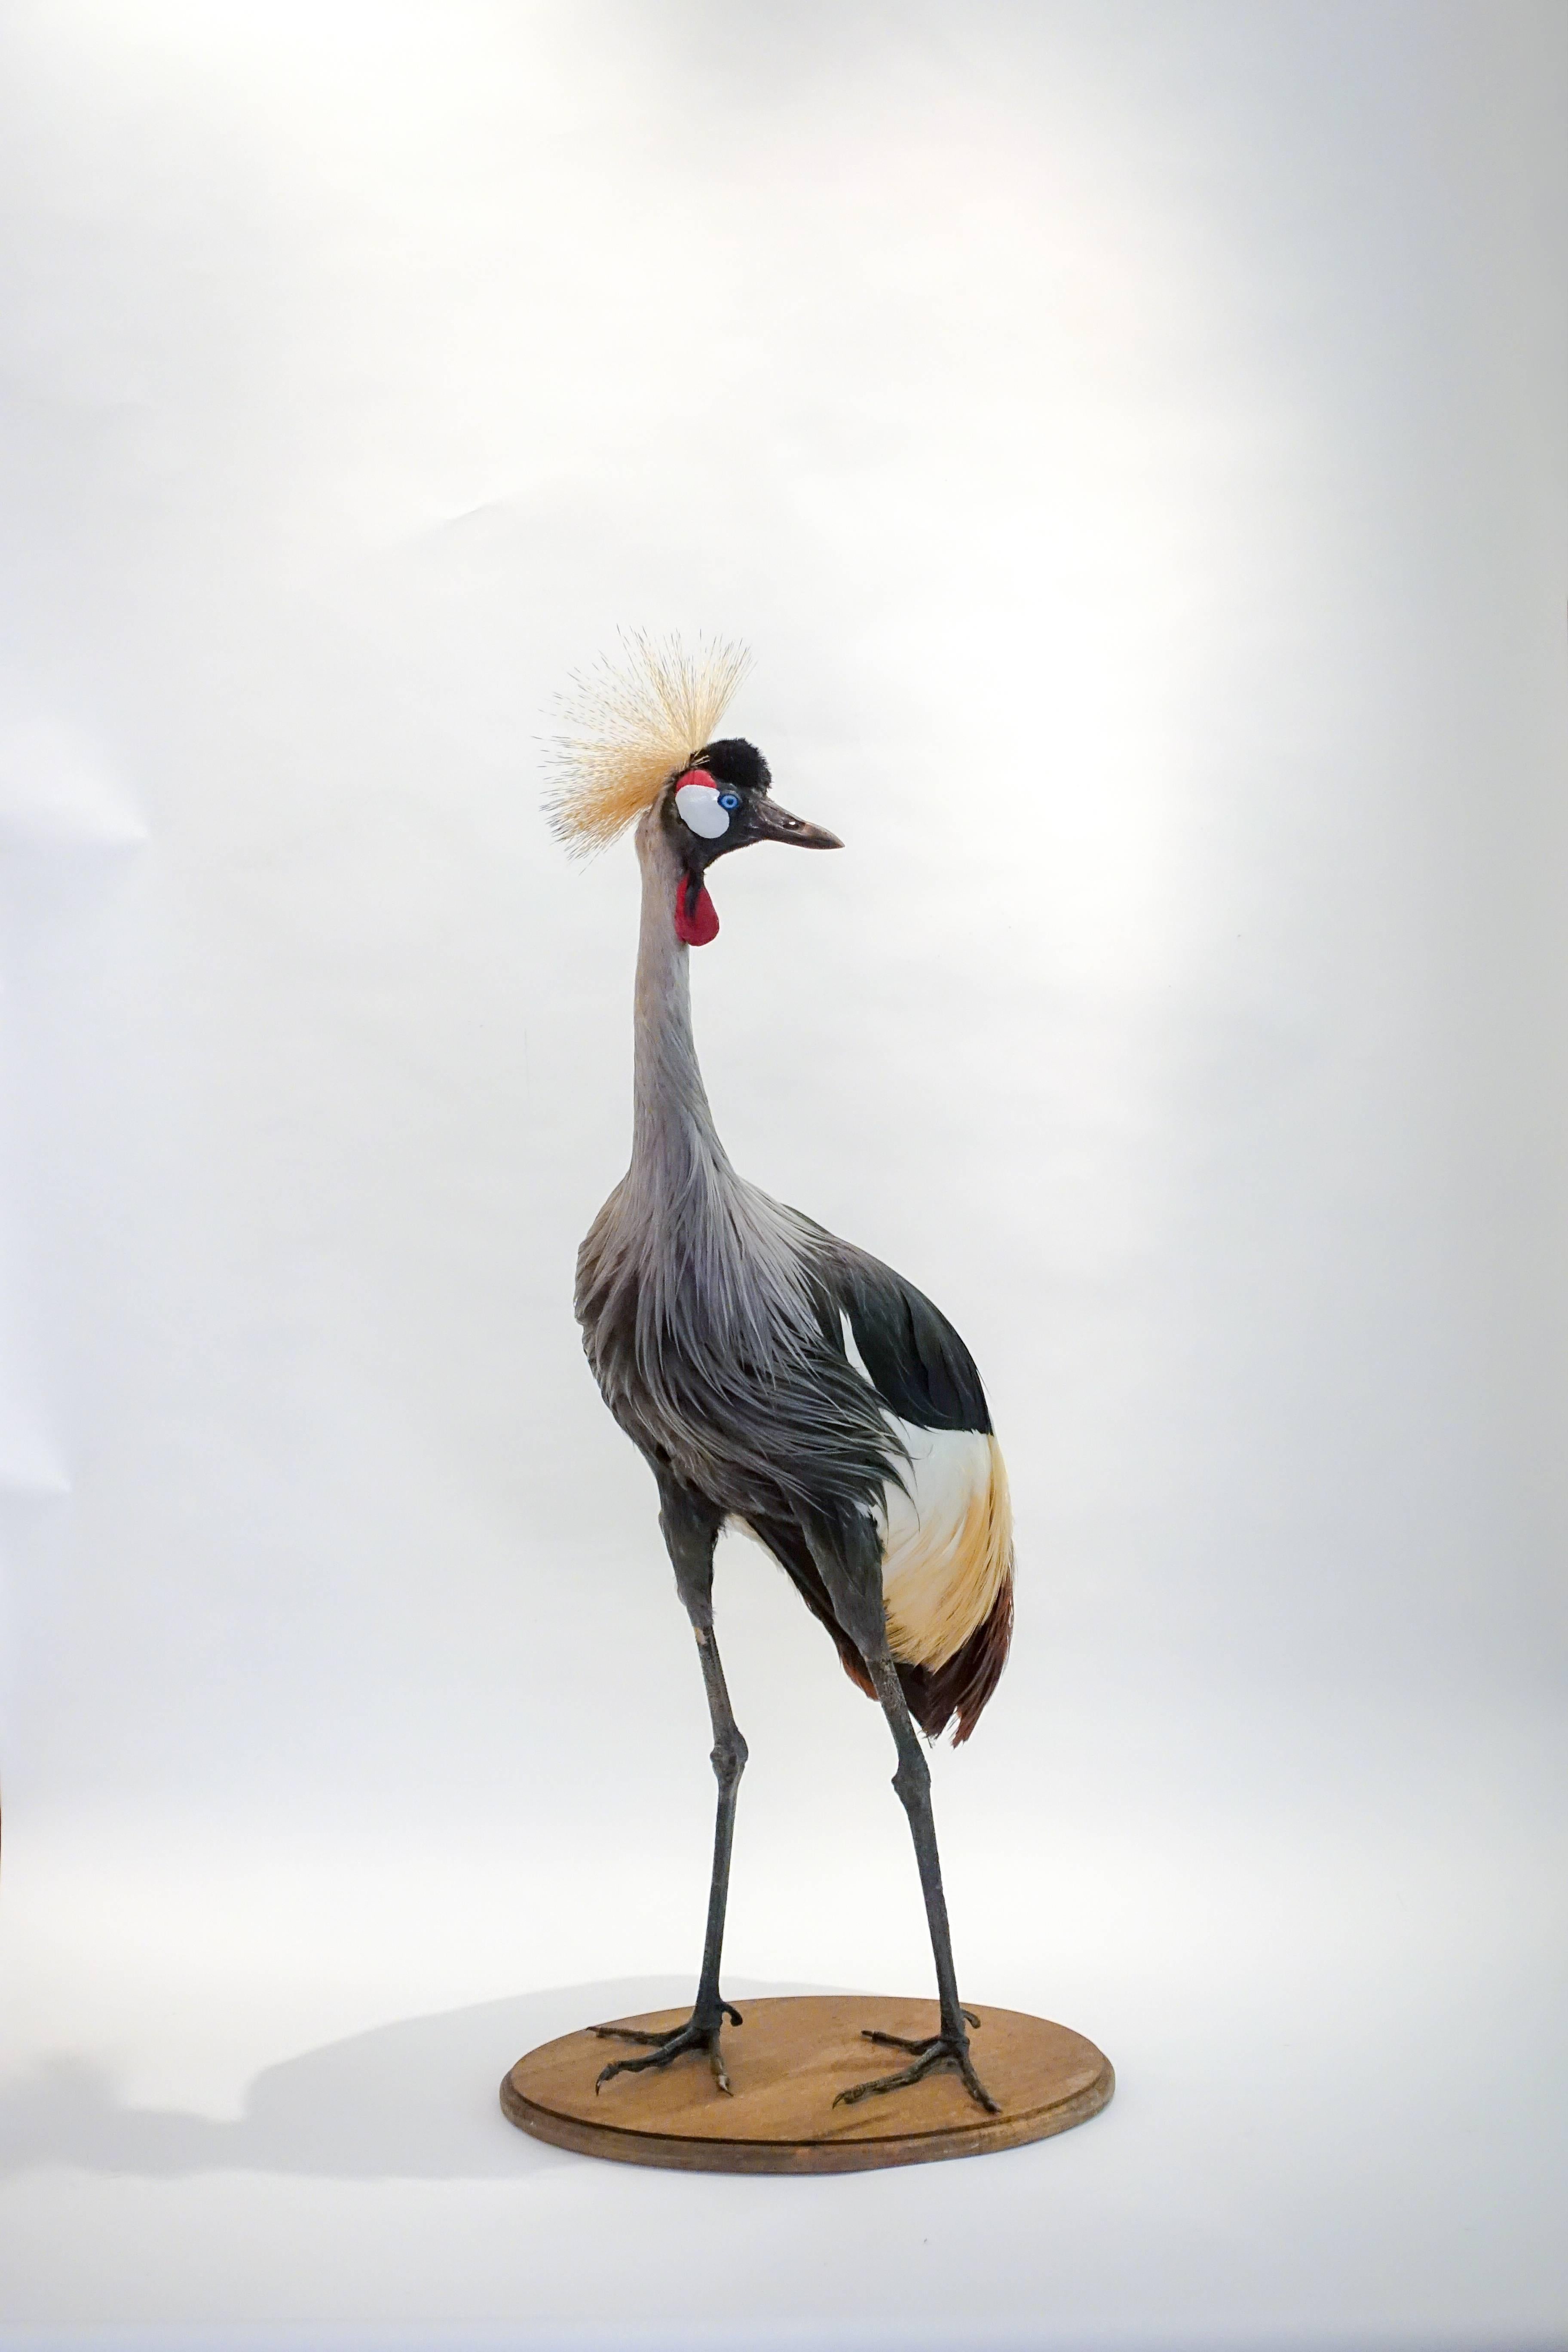 Beautiful taxidermy work of an African or grey crowned crane. Found throughout Africa the grey crowned crane is one of the most impressive birds on the continent. Its body plumage is mainly grey. The wings are predominantly white, but contain